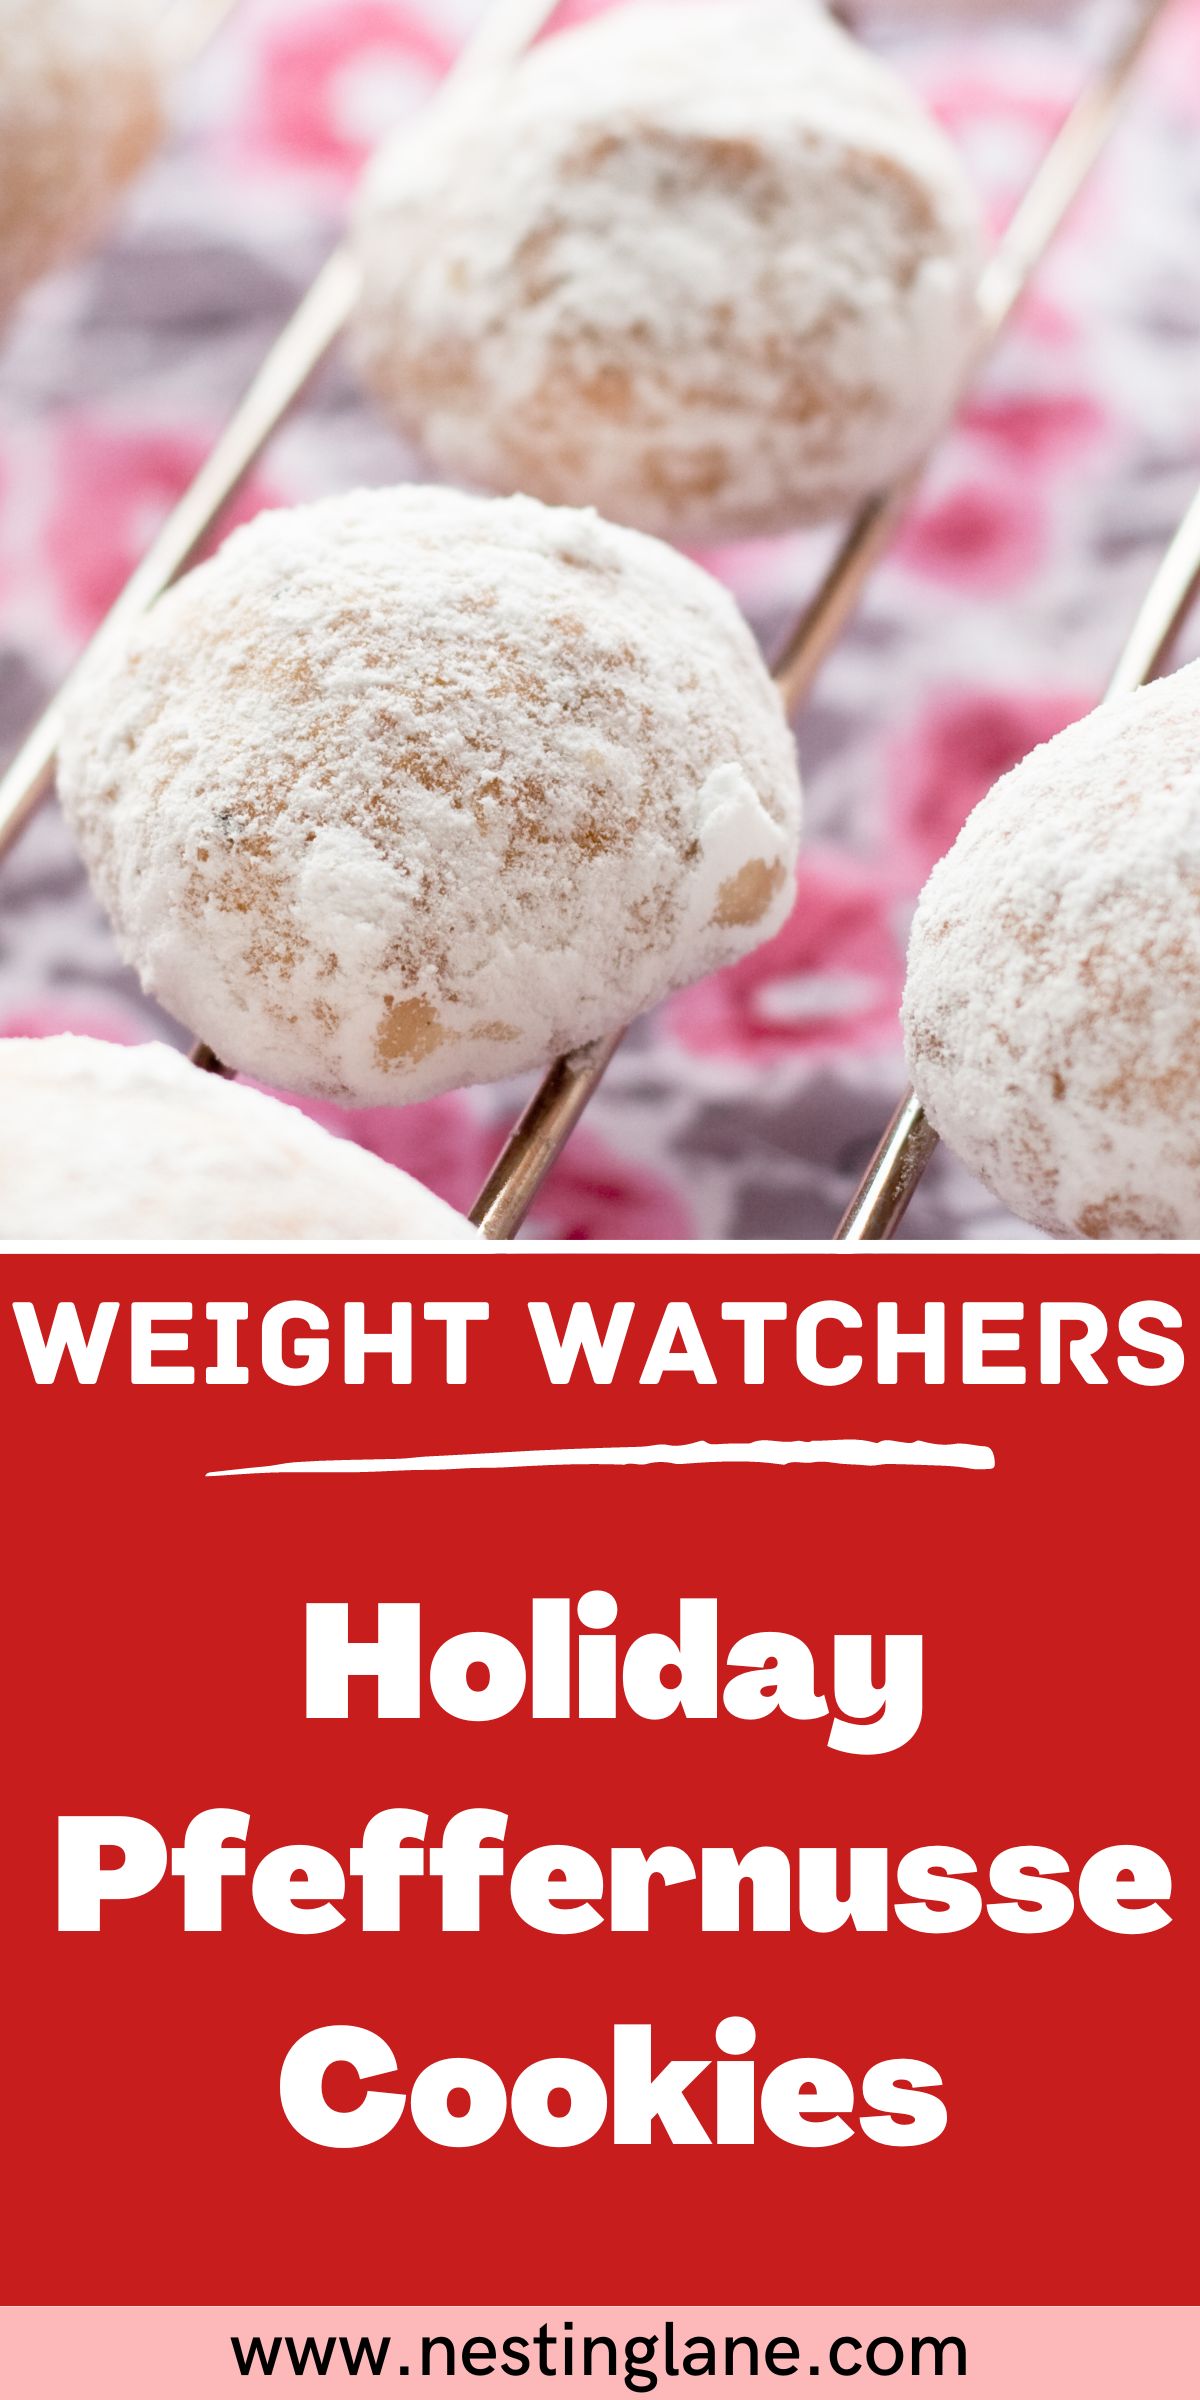 Graphic for Pinterest of Weight Watchers Holiday Pfeffernusse Cookies Recipe.